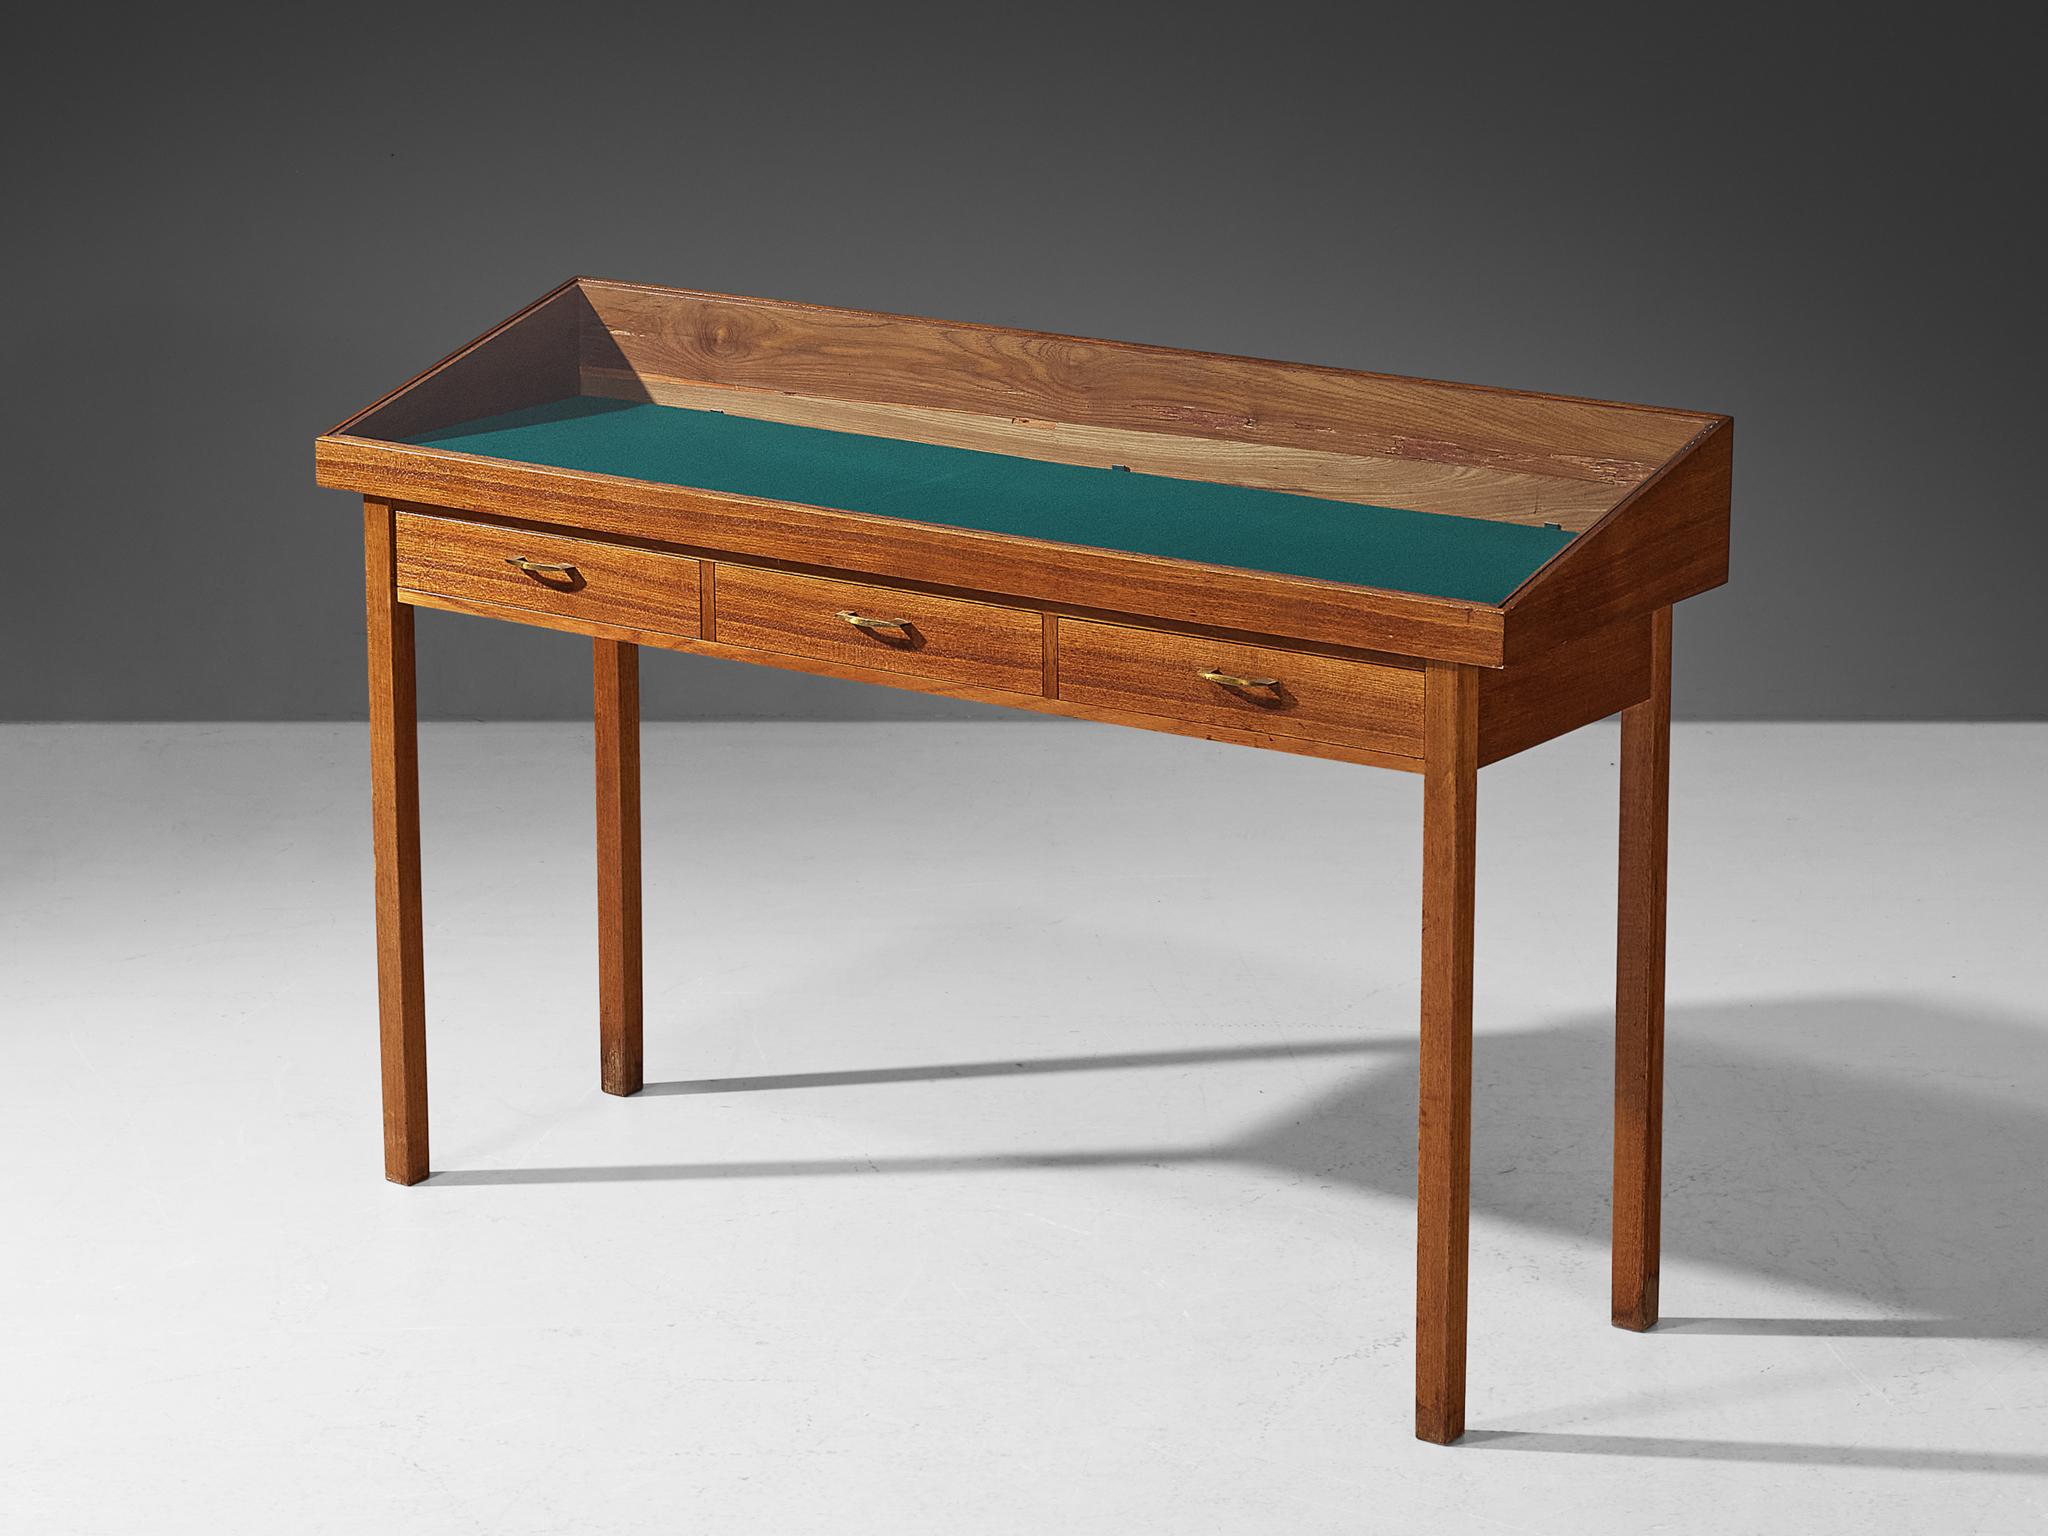 Showcase, walnut veneer, pine, felt, glass, brass, Europe, 1960s. 

This elegant showcase is executed in pine and finished with a warm walnut veneer. Its oblique glass top makes sure that your special belongings are well displayed. Striking green